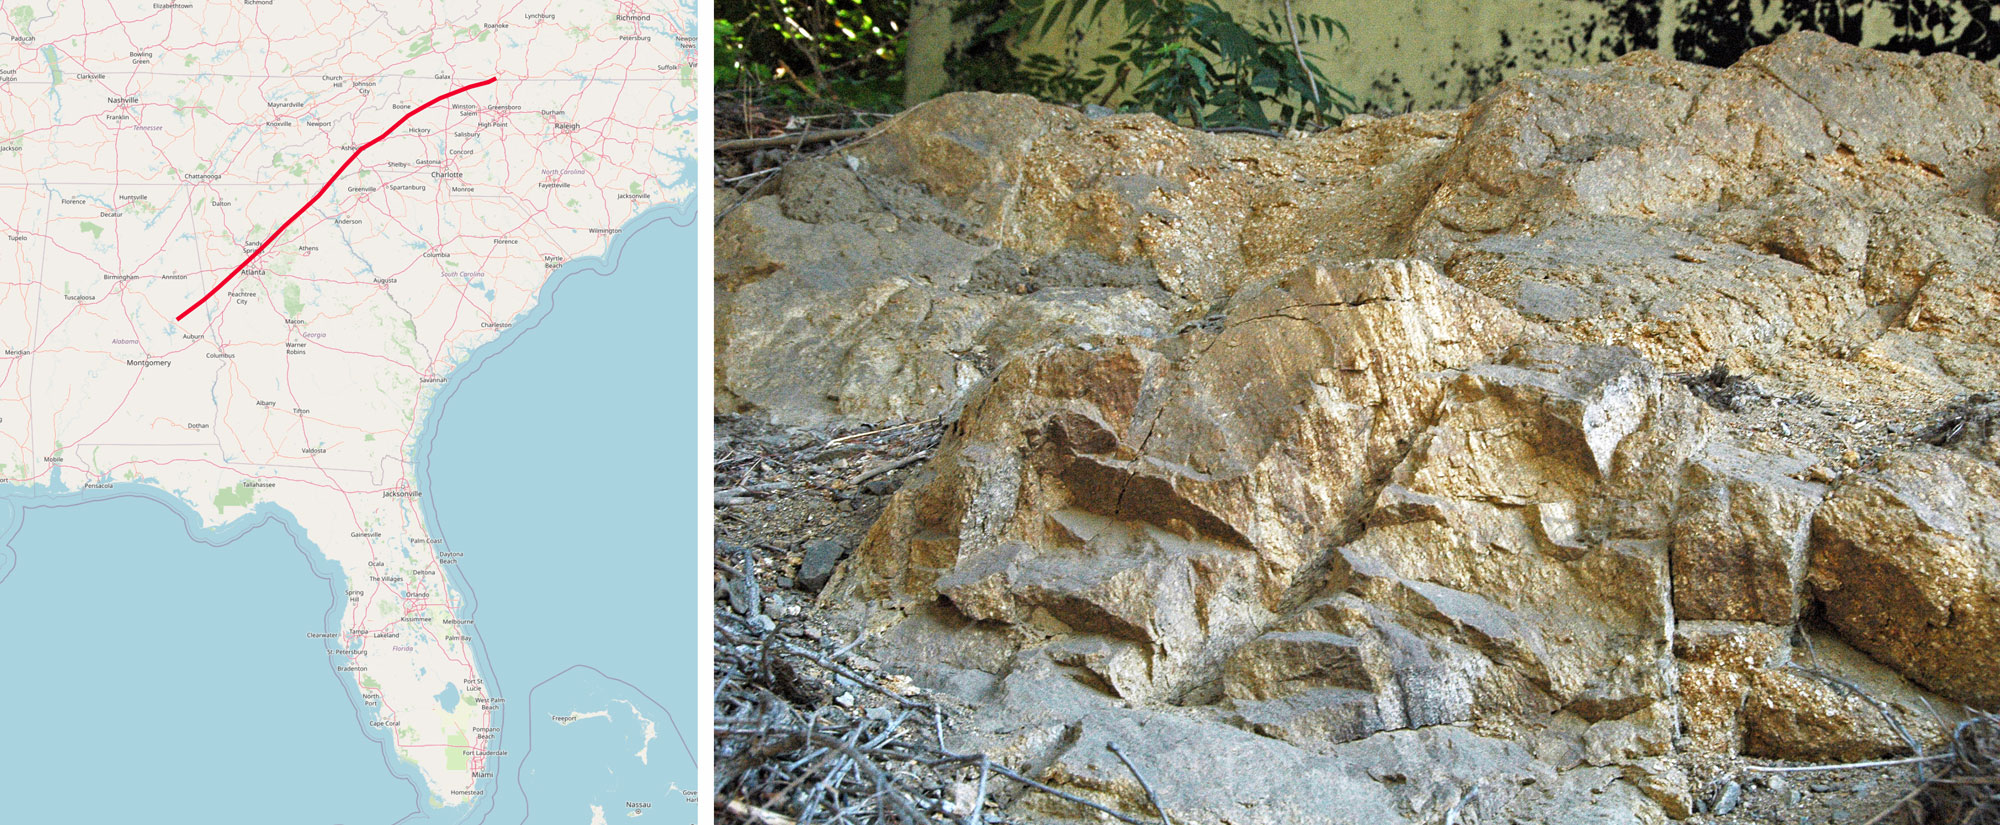 2-Panel figure. Panel 1: Map showing the location of the Brevard Fault Zone. Panel 2: Photo of rocks at the Brevard Fault Zone.